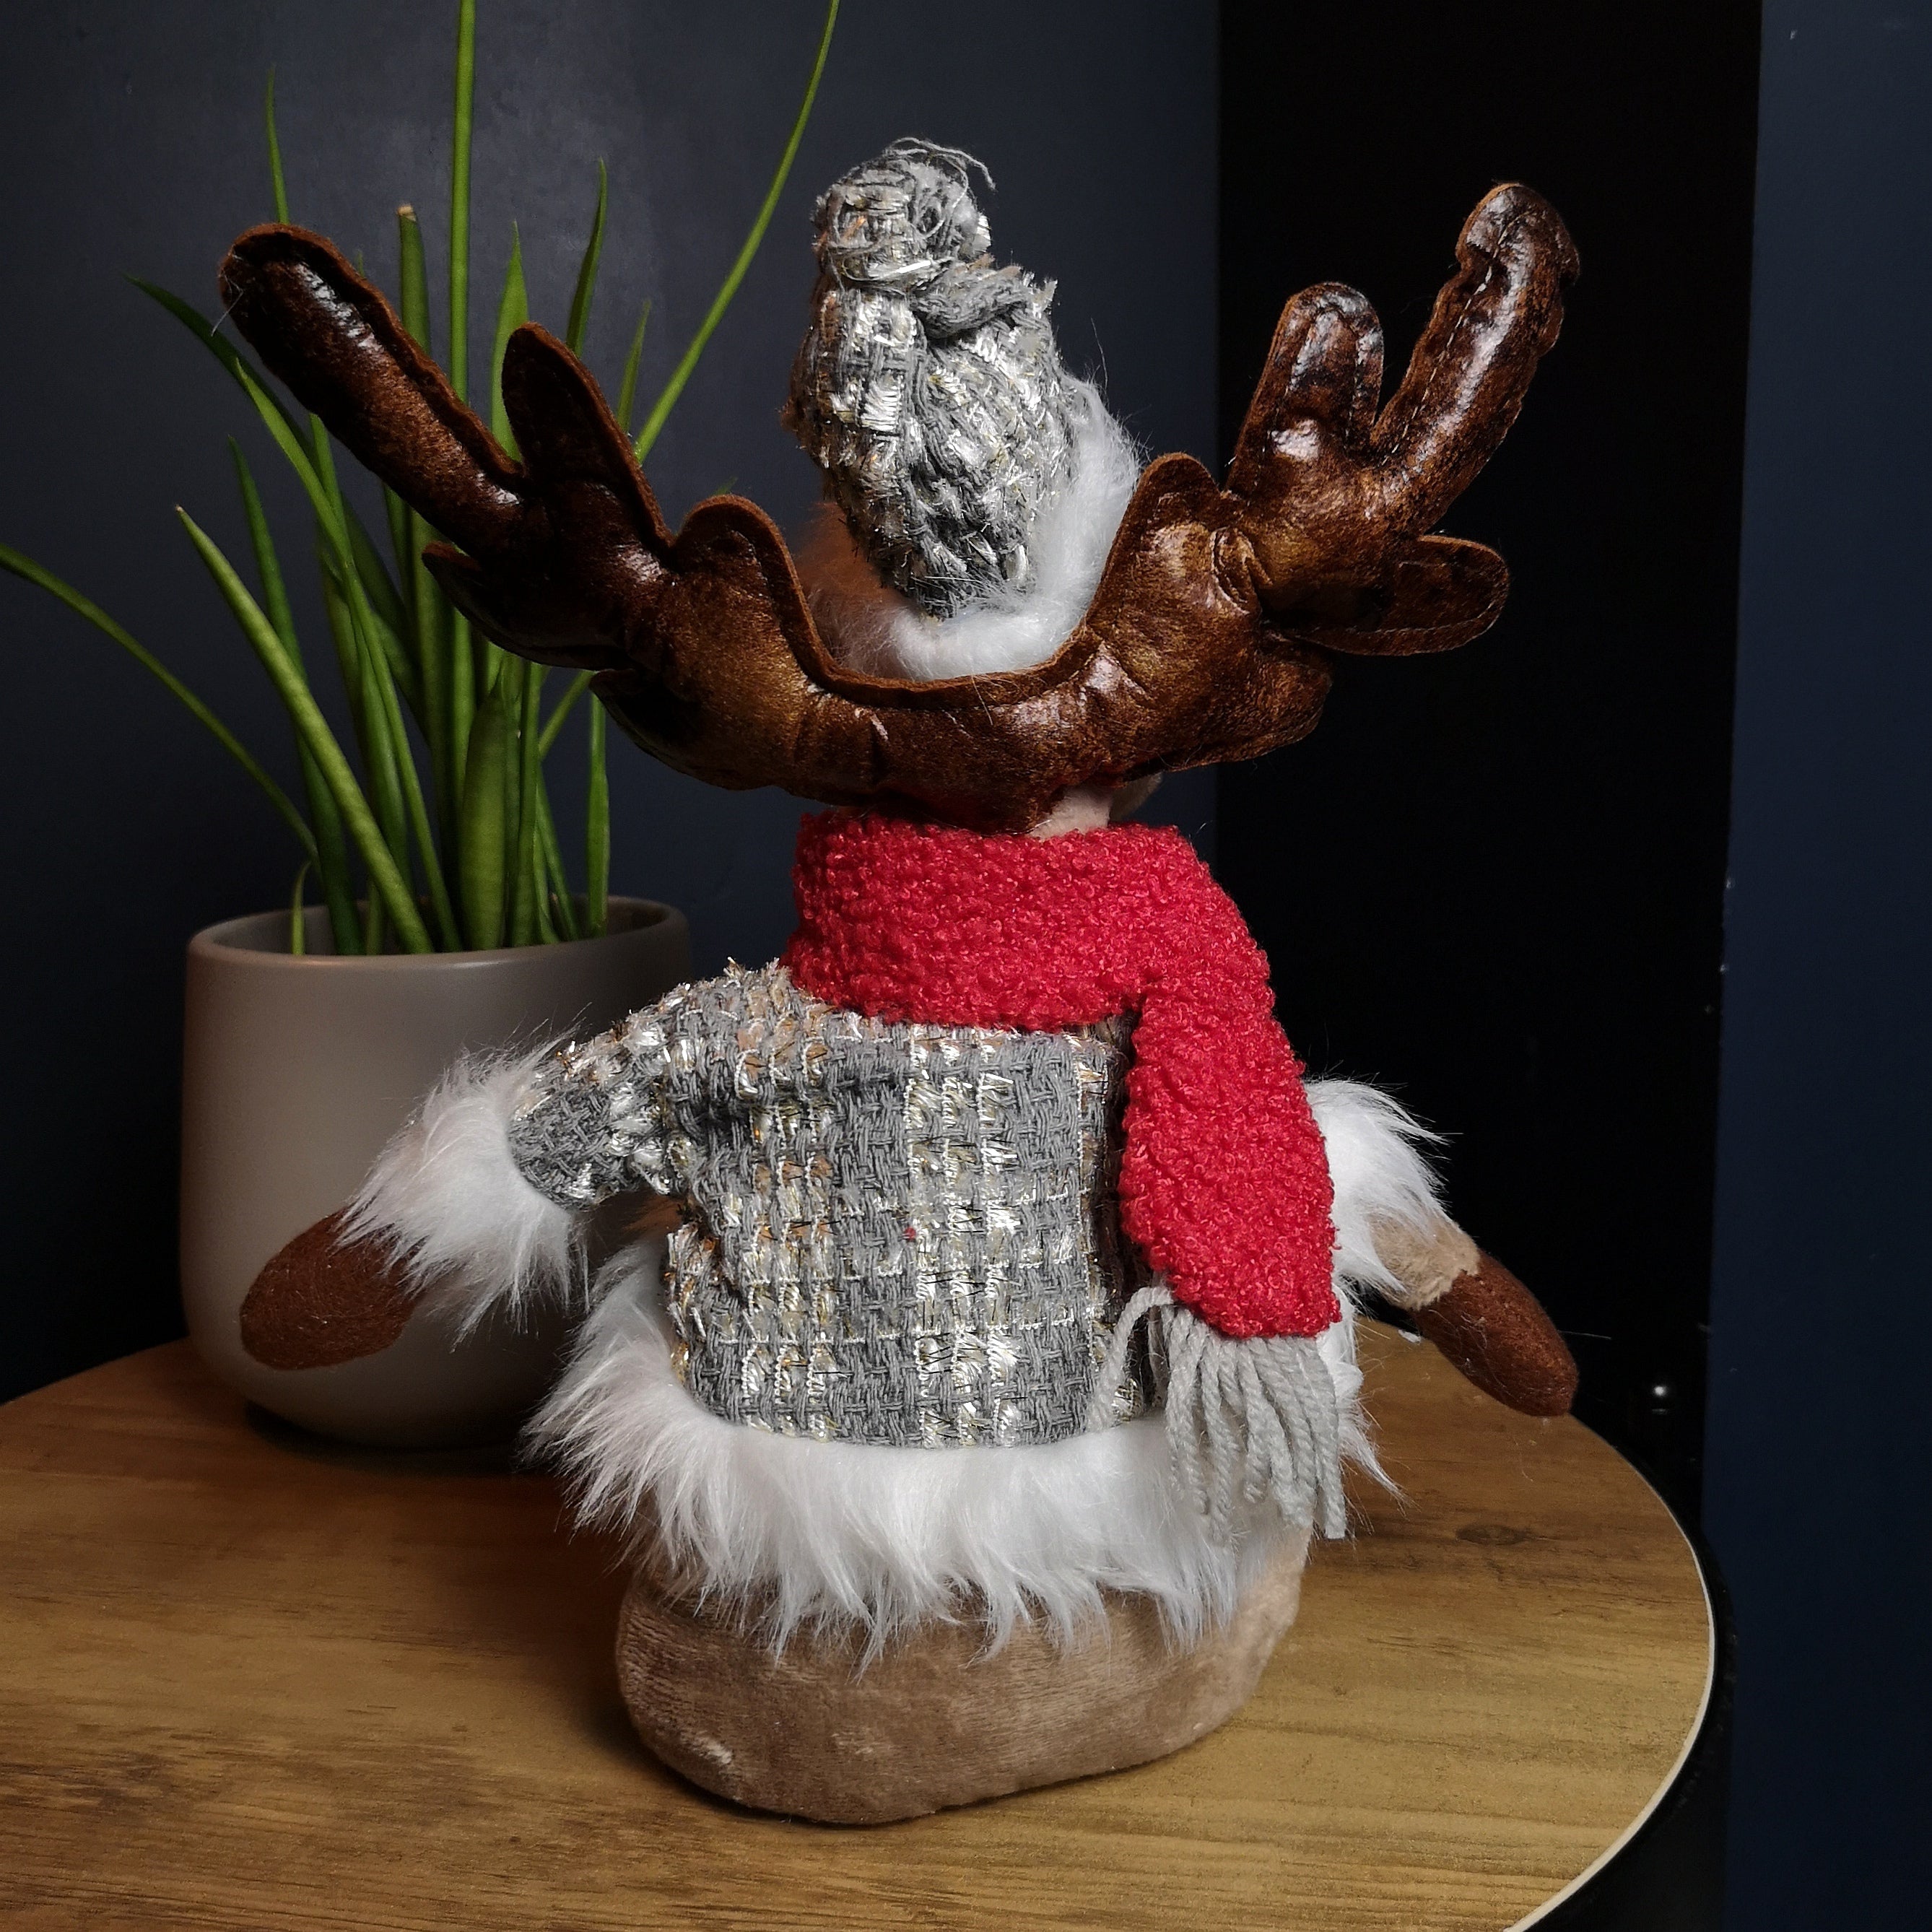 38cm Plush Reindeer Christmas Decoration with Hat and Scarf in Grey